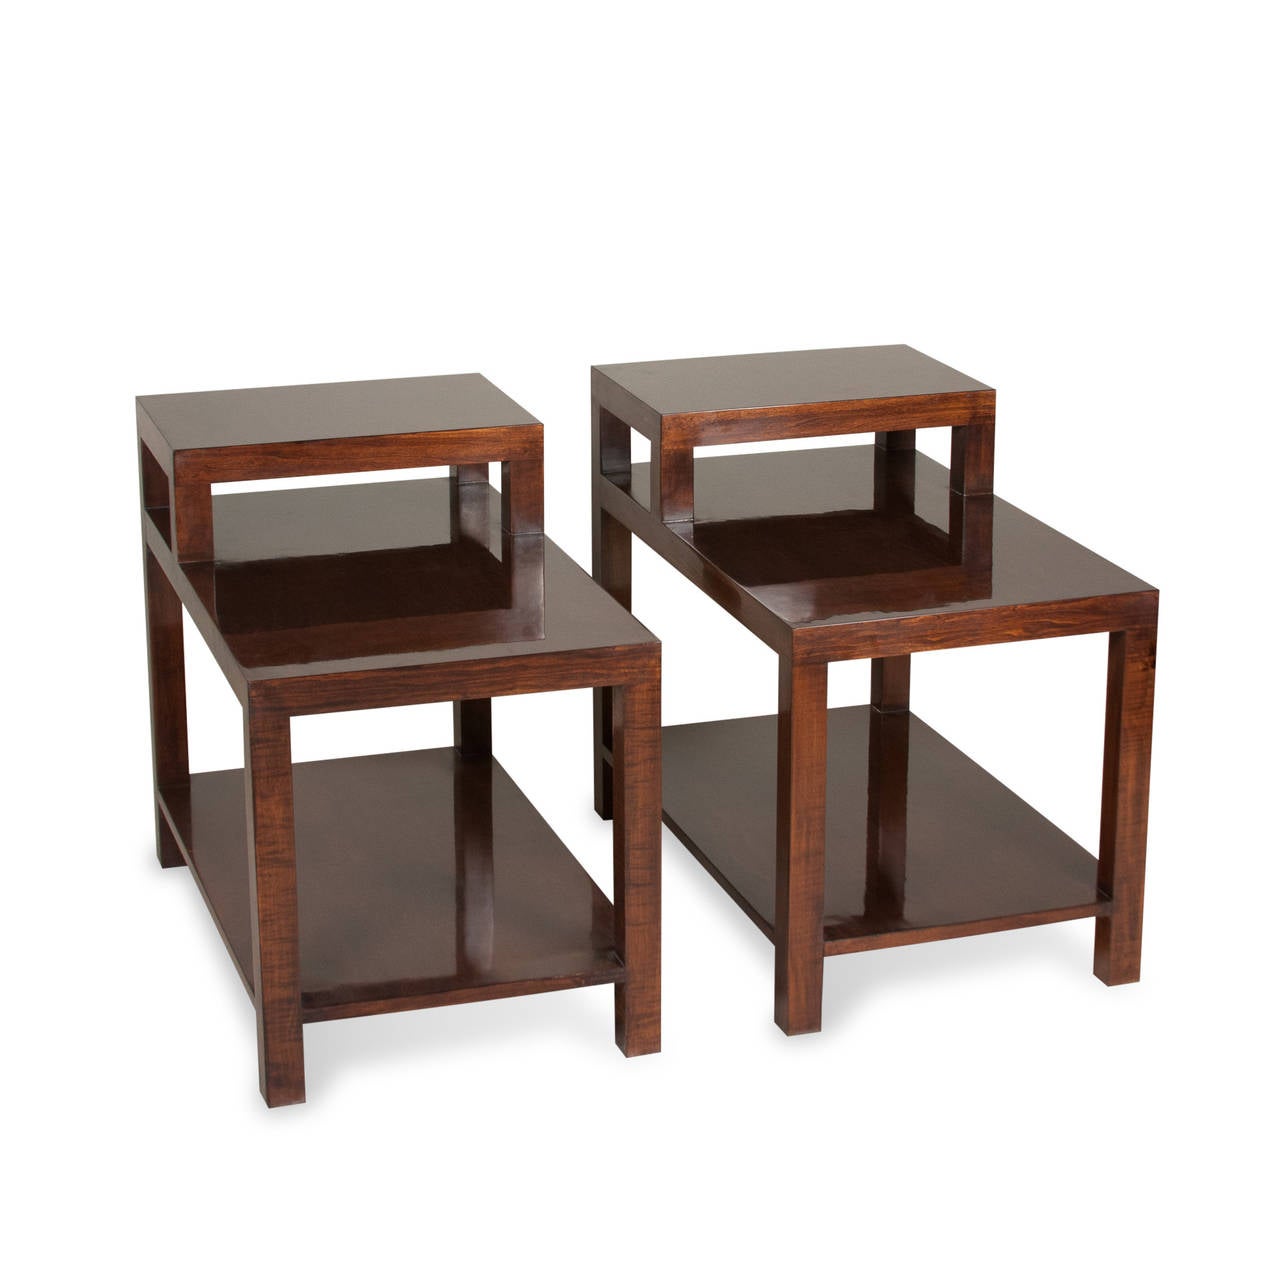 Pair of teak stepped end tables, the legs and supports of squared wooden form, and having lower shelf, by T. H. Robsjohn-Gibbings for Widdicomb, American, 1950s. Measures: 30 in x 18 in, height in back 24 1/2 in, height in front 19 1/2 in. (Item